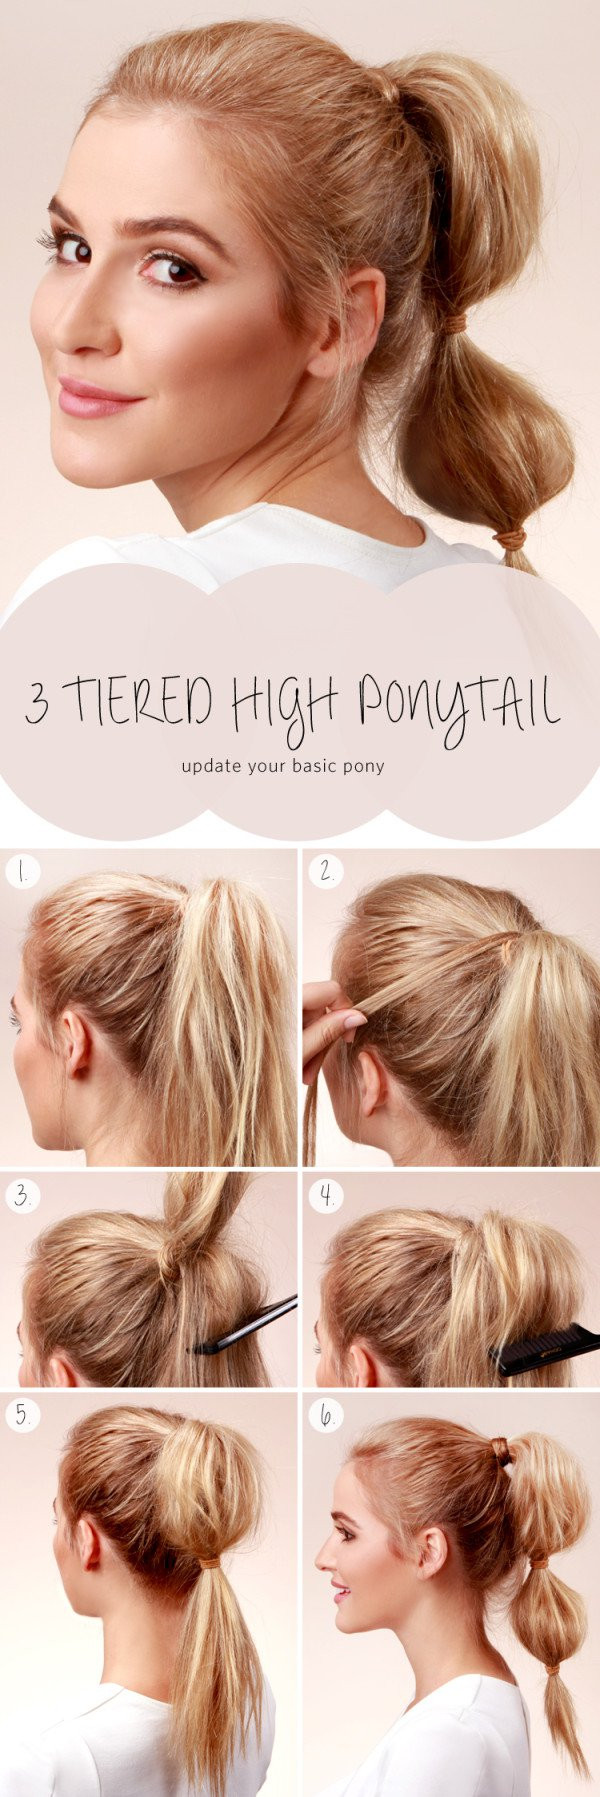 Everyday Hairstyles For Long Hair
 14 Cute And Easy Ways To Create Awesome Hairstyle For Less